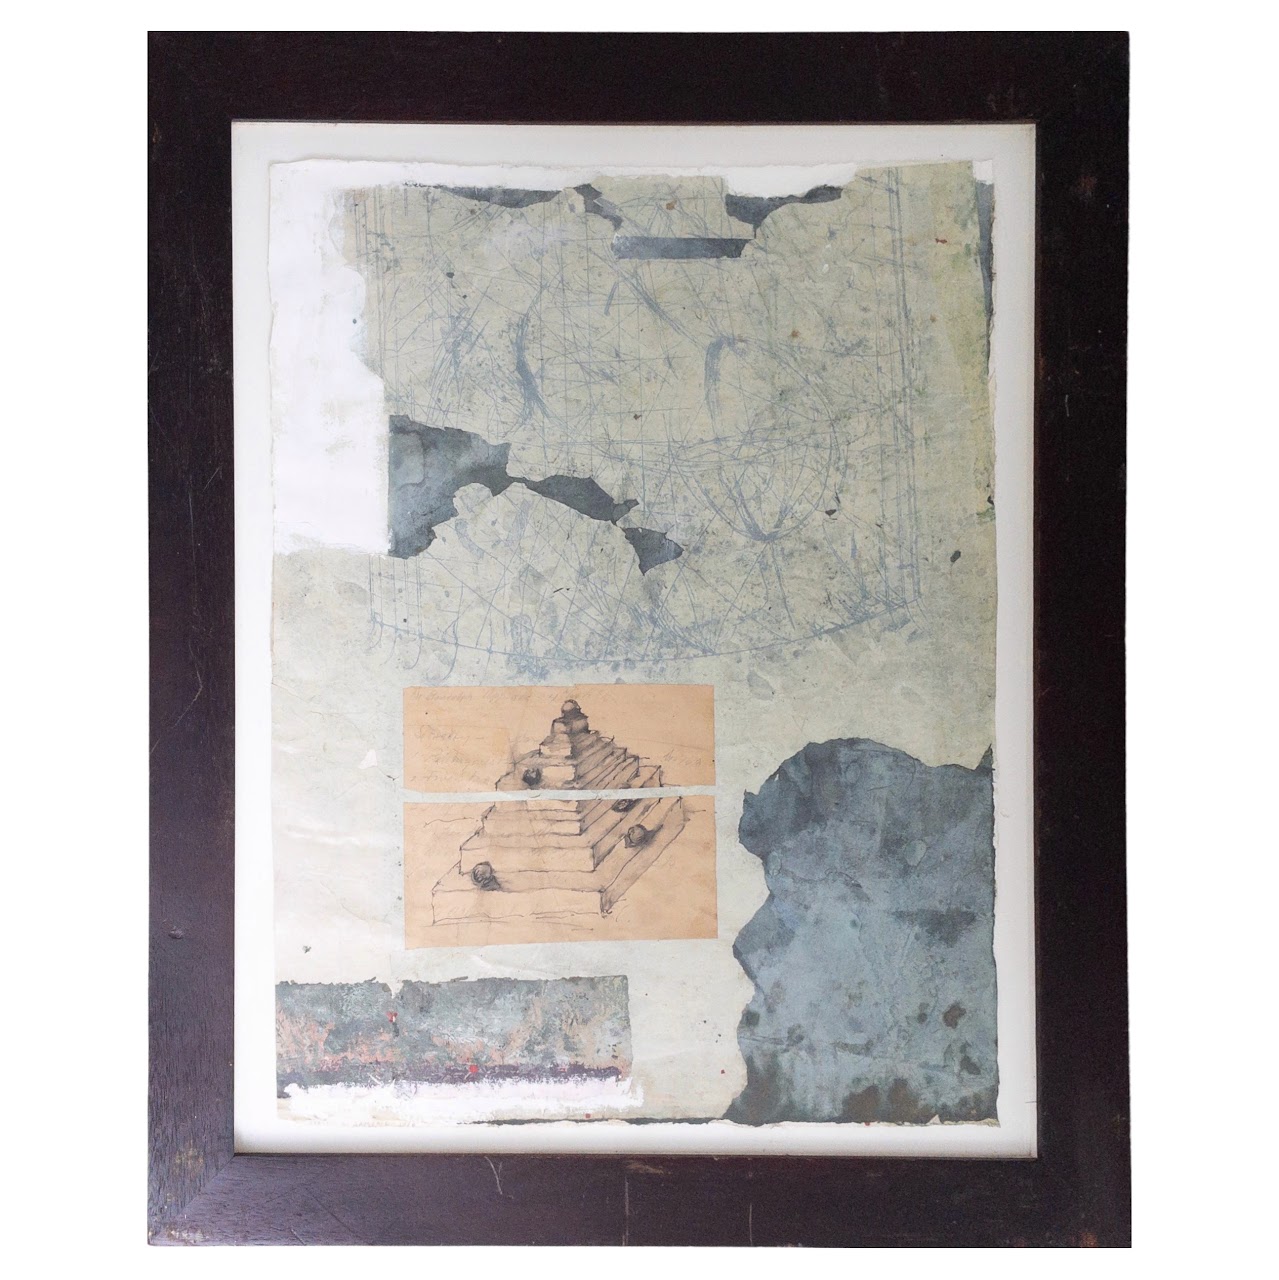 Steven Gambrel Signed Painting & Collage #2